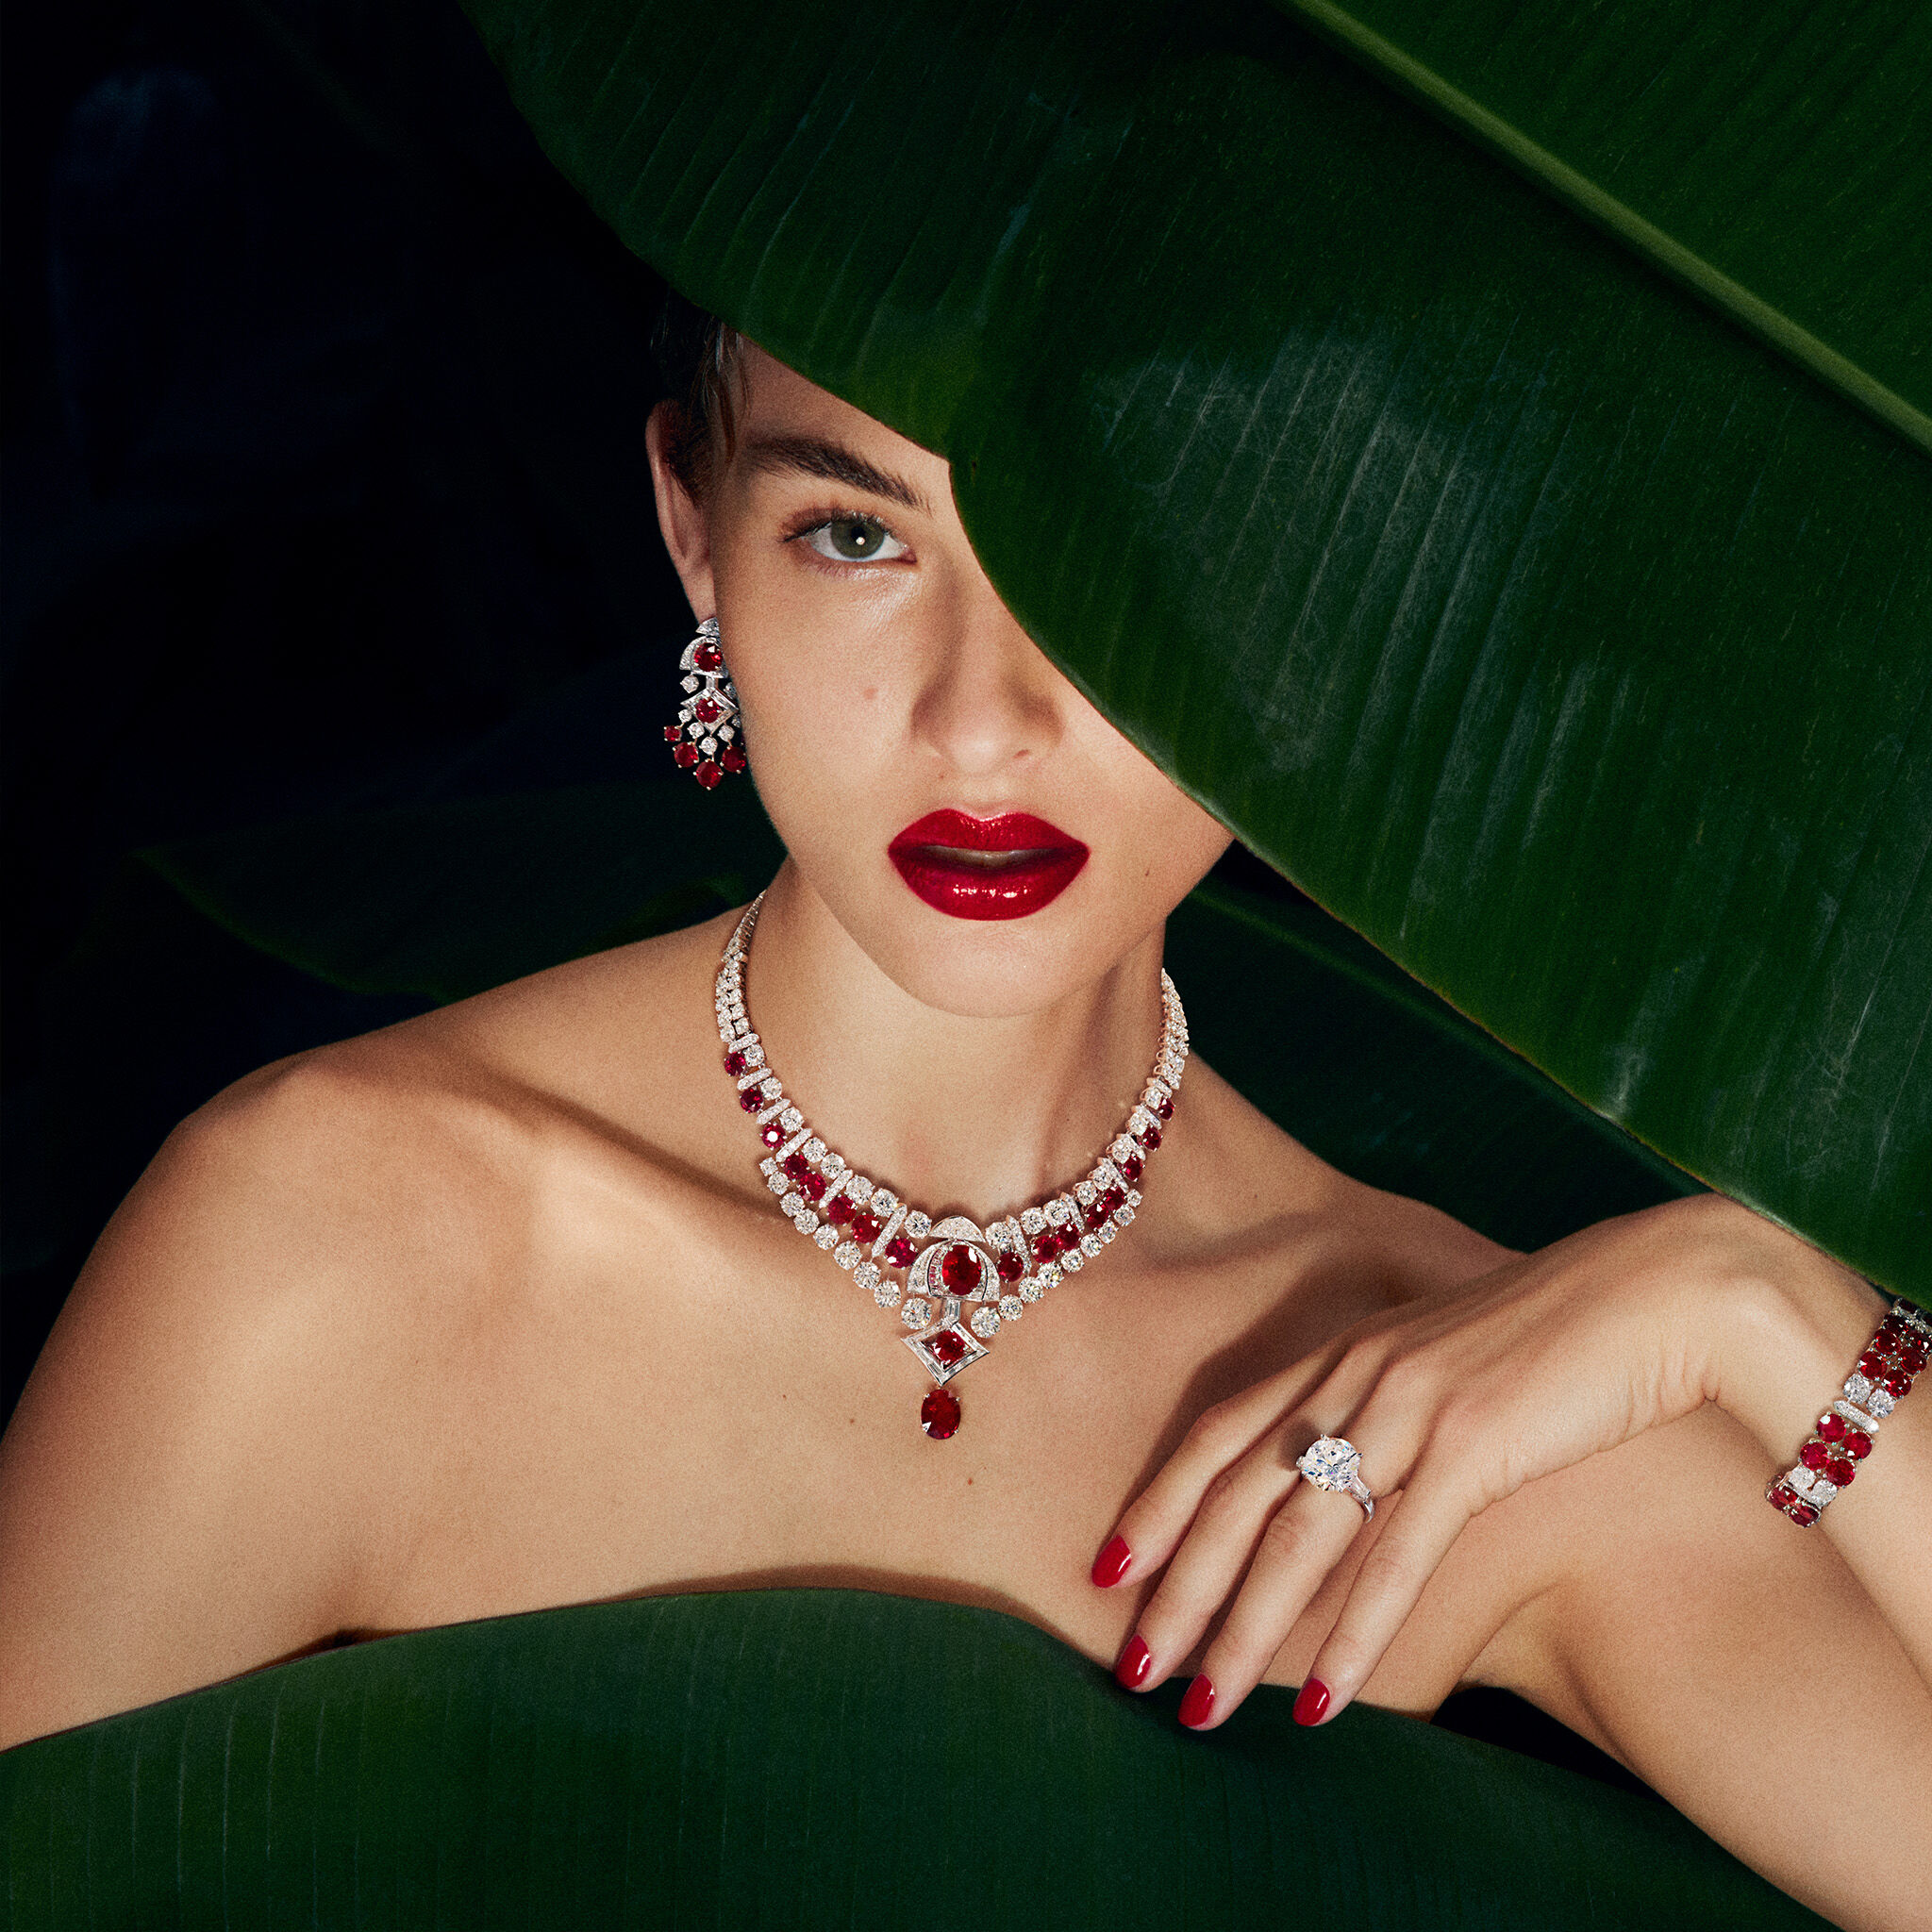 GRAFF's GRAFFABULOUS High Jewellery Campaign Is Its Most Exquisite Yet